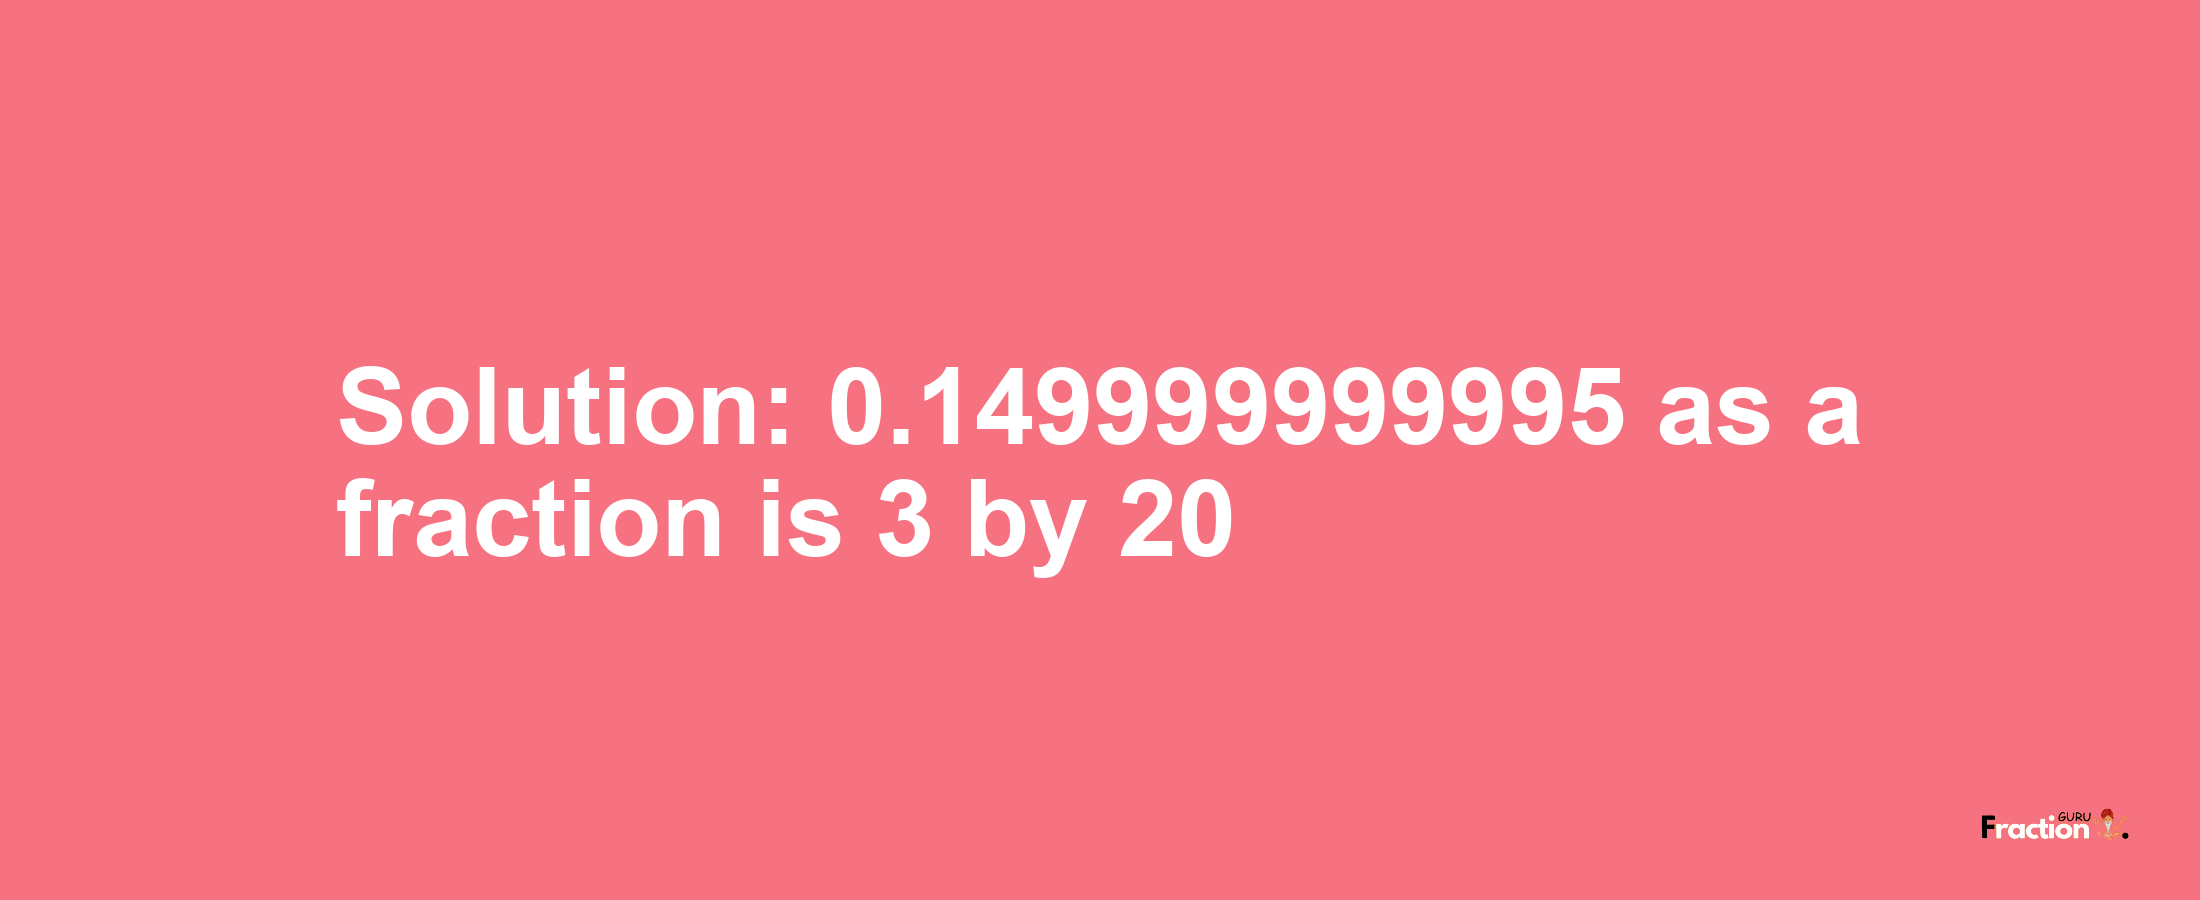 Solution:0.149999999995 as a fraction is 3/20